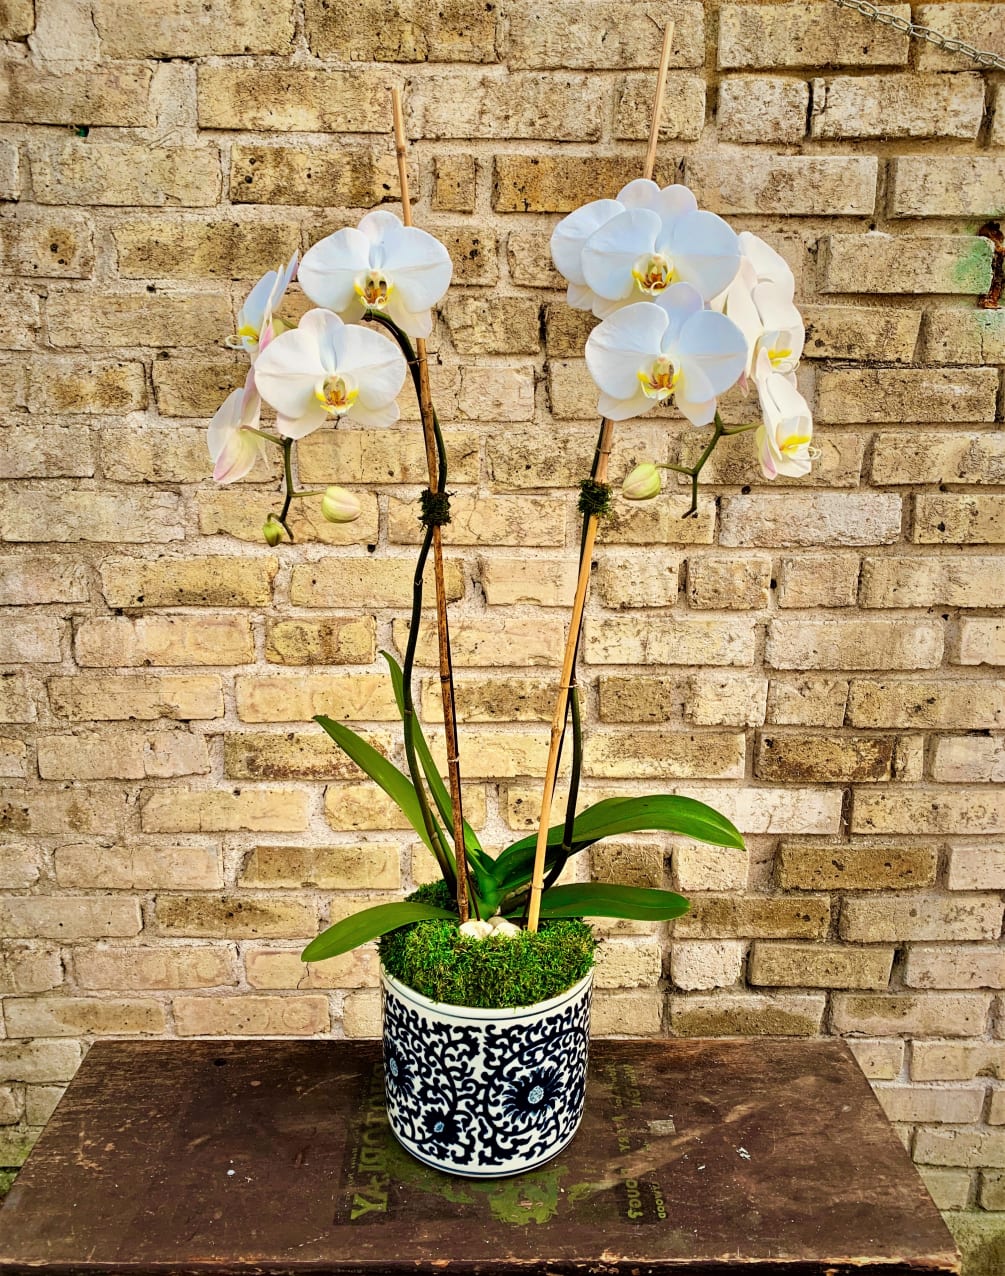 White Phalaenopsis Orchid in Asian Ceramic Container
Using Bamboo, Green Sheet Moss and